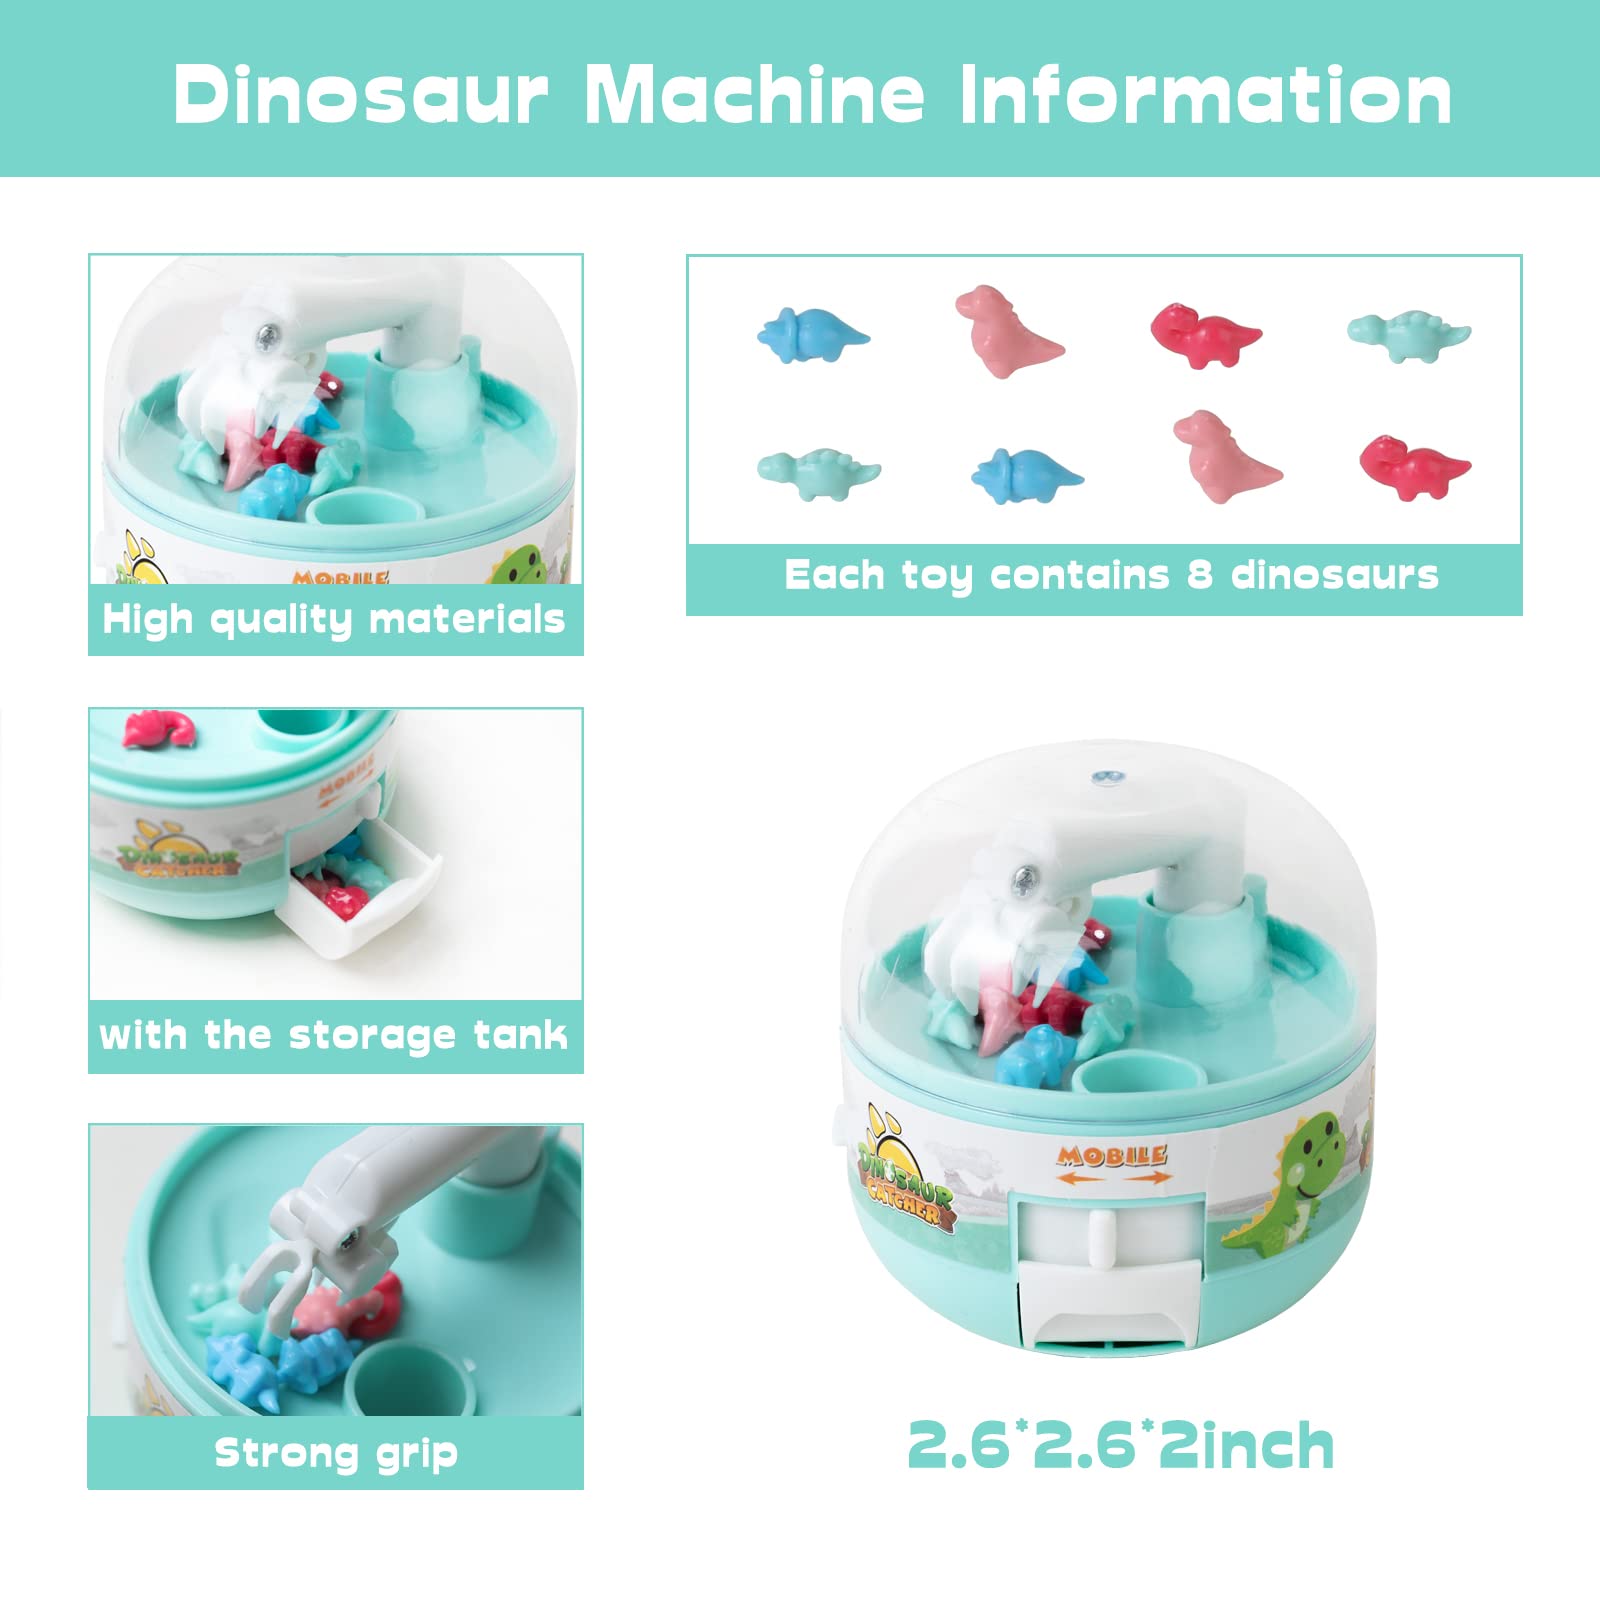 4 Pcs Mini Claw Machines ,Mini Dinosaur Claw Machine Toy Fingertip Toys Cute Things for Pinata Stuffers Party Favors for Classroom Prizes Birthday Gifts for 3 4 5 6 7 8 Years Old Boys and Girls